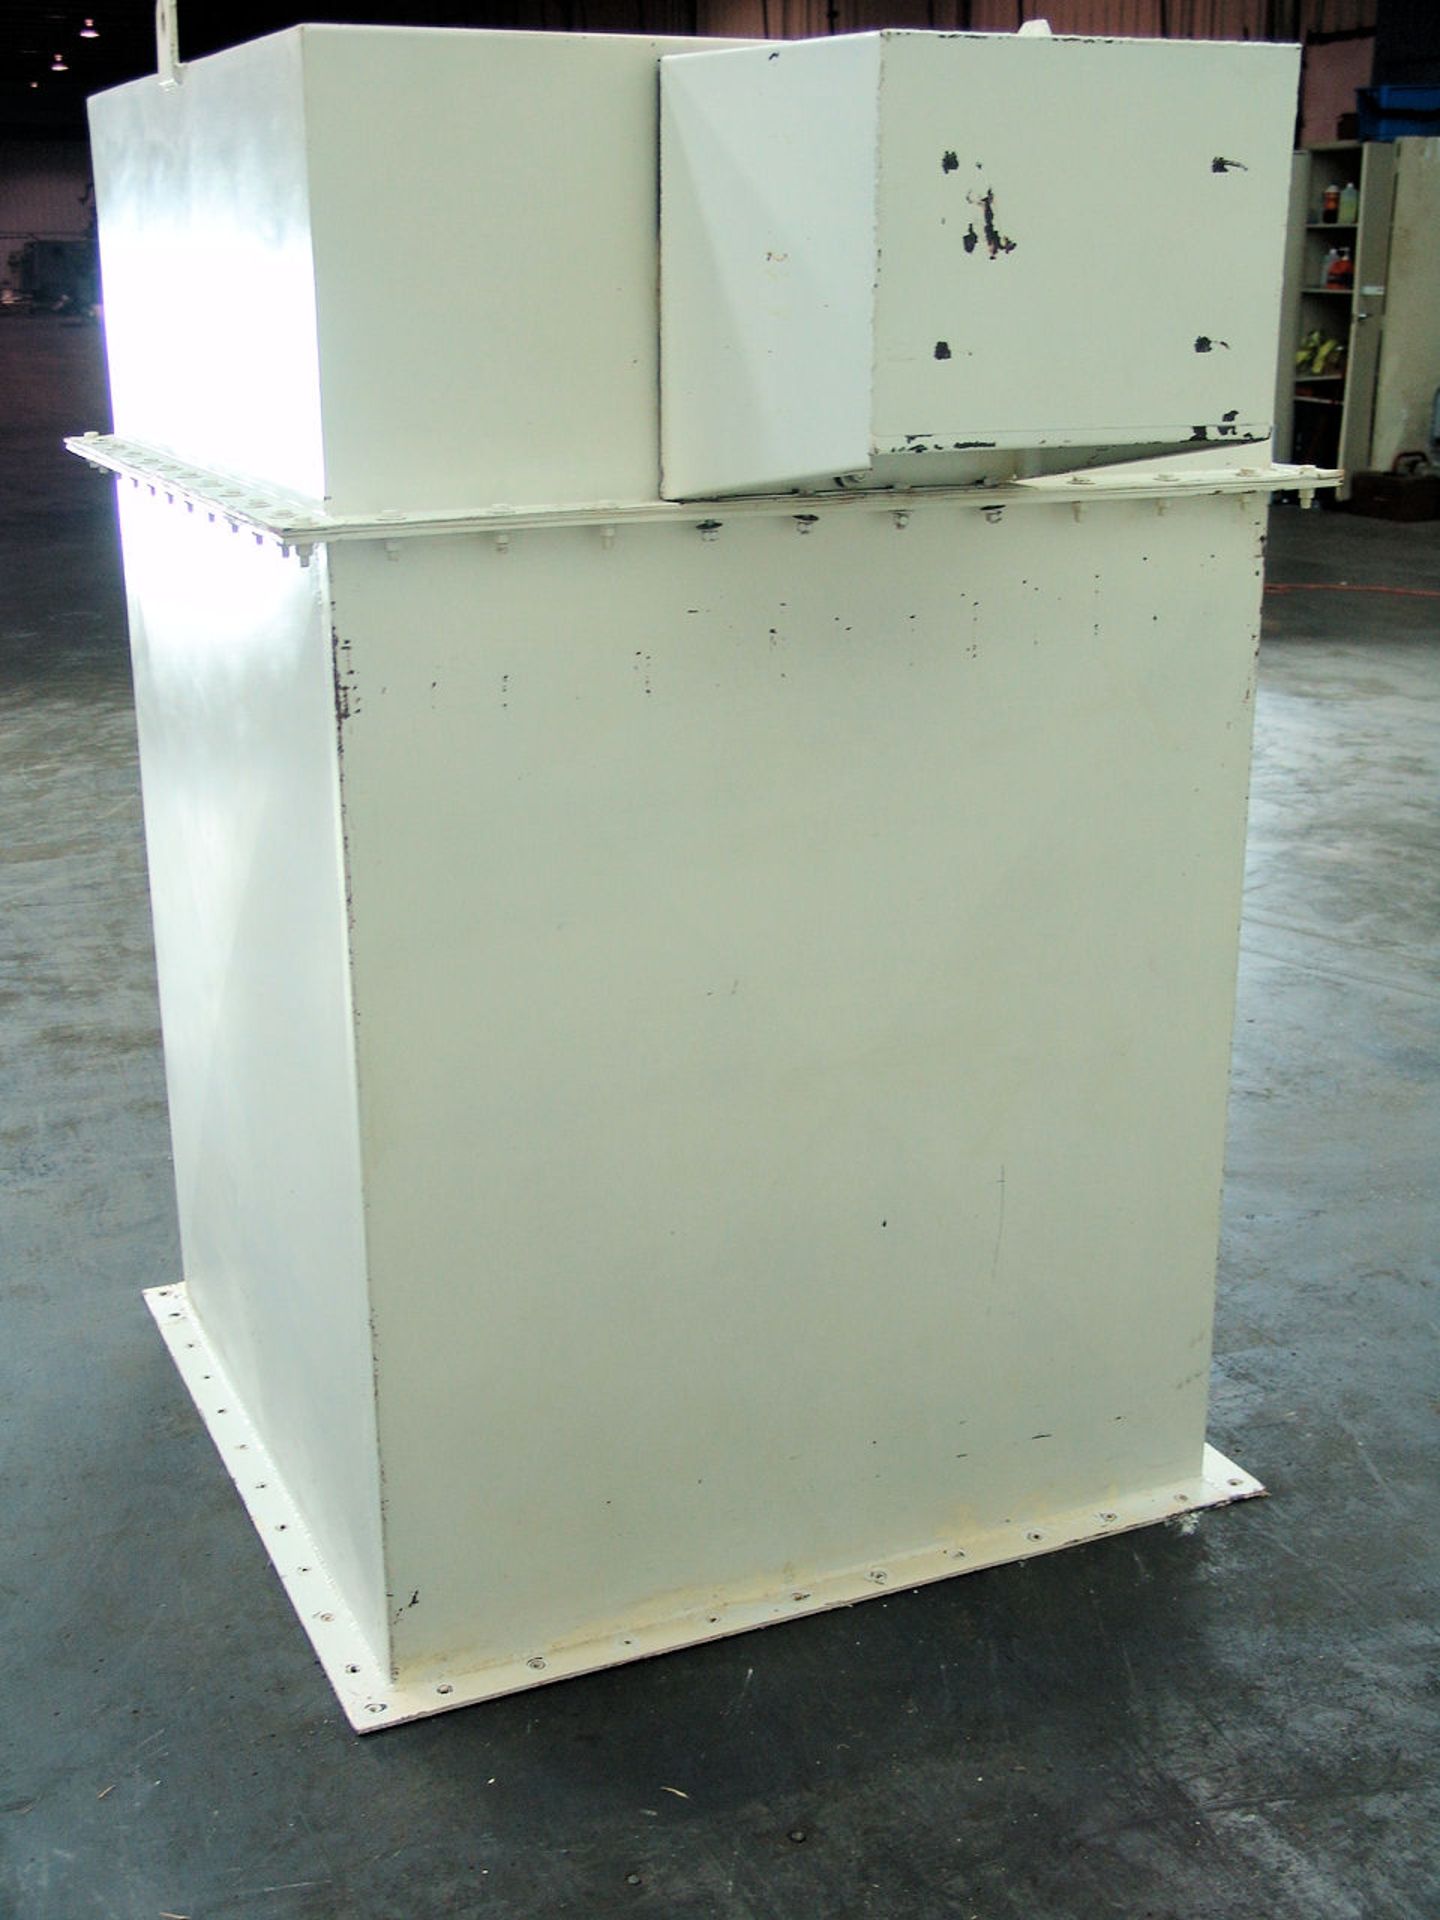 Shick 36AJ25 Top Loading Bin Dust Collector System (Rigging Fee - $220) - Image 4 of 5